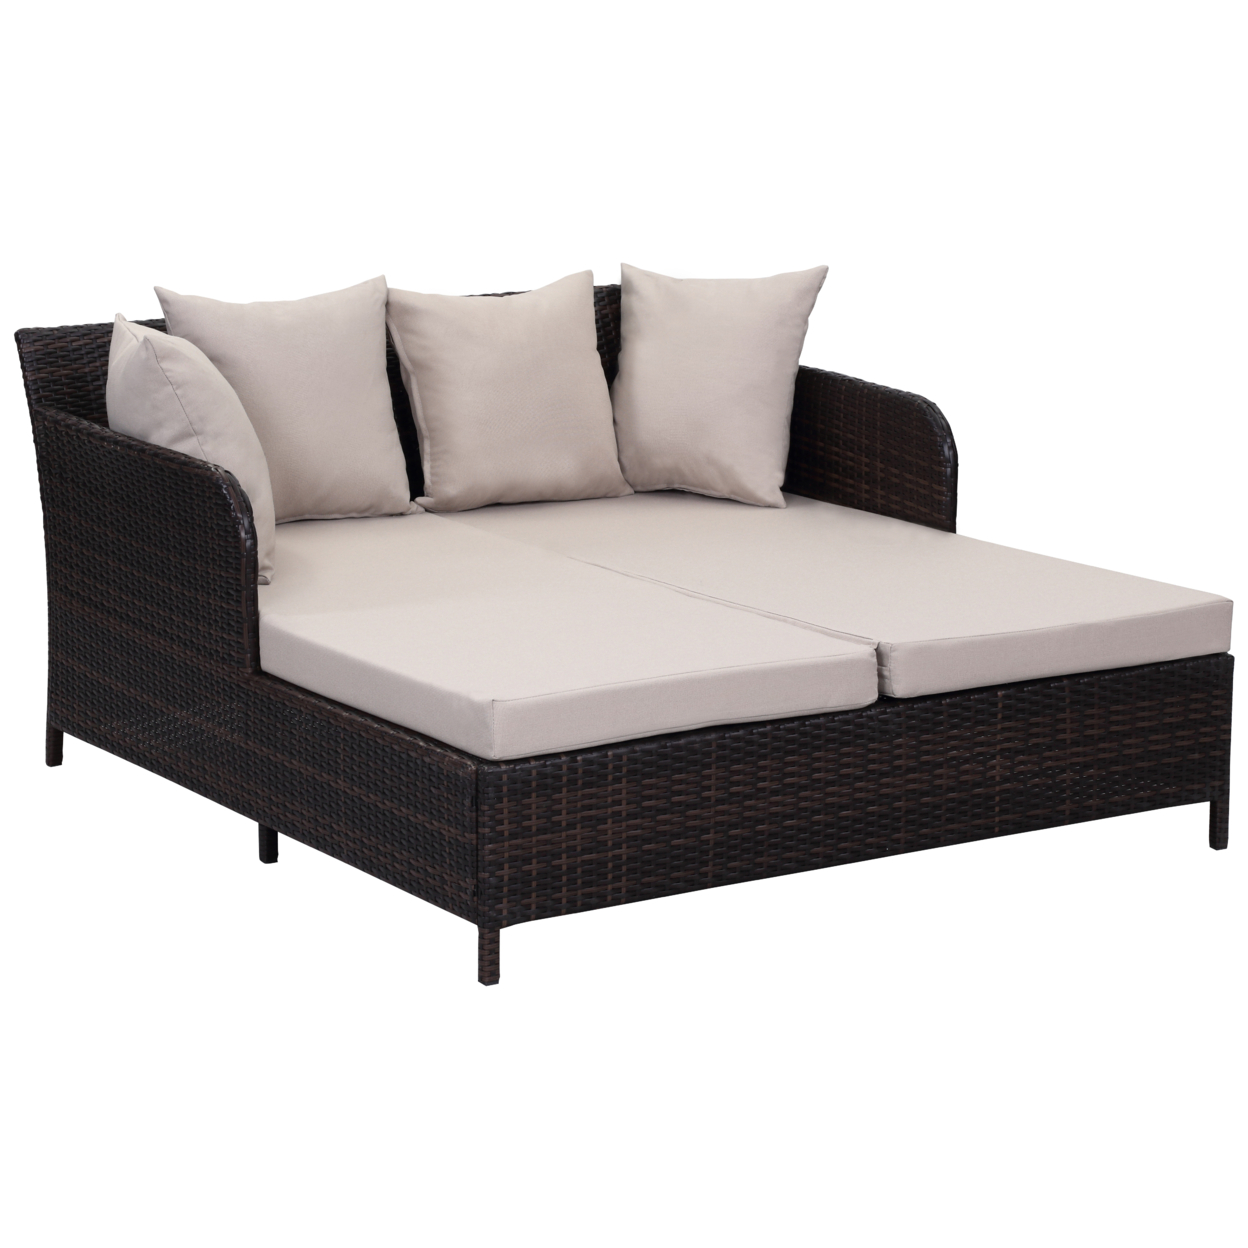 SAFAVIEH Outdoor Collection August Daybed Brown/Sand